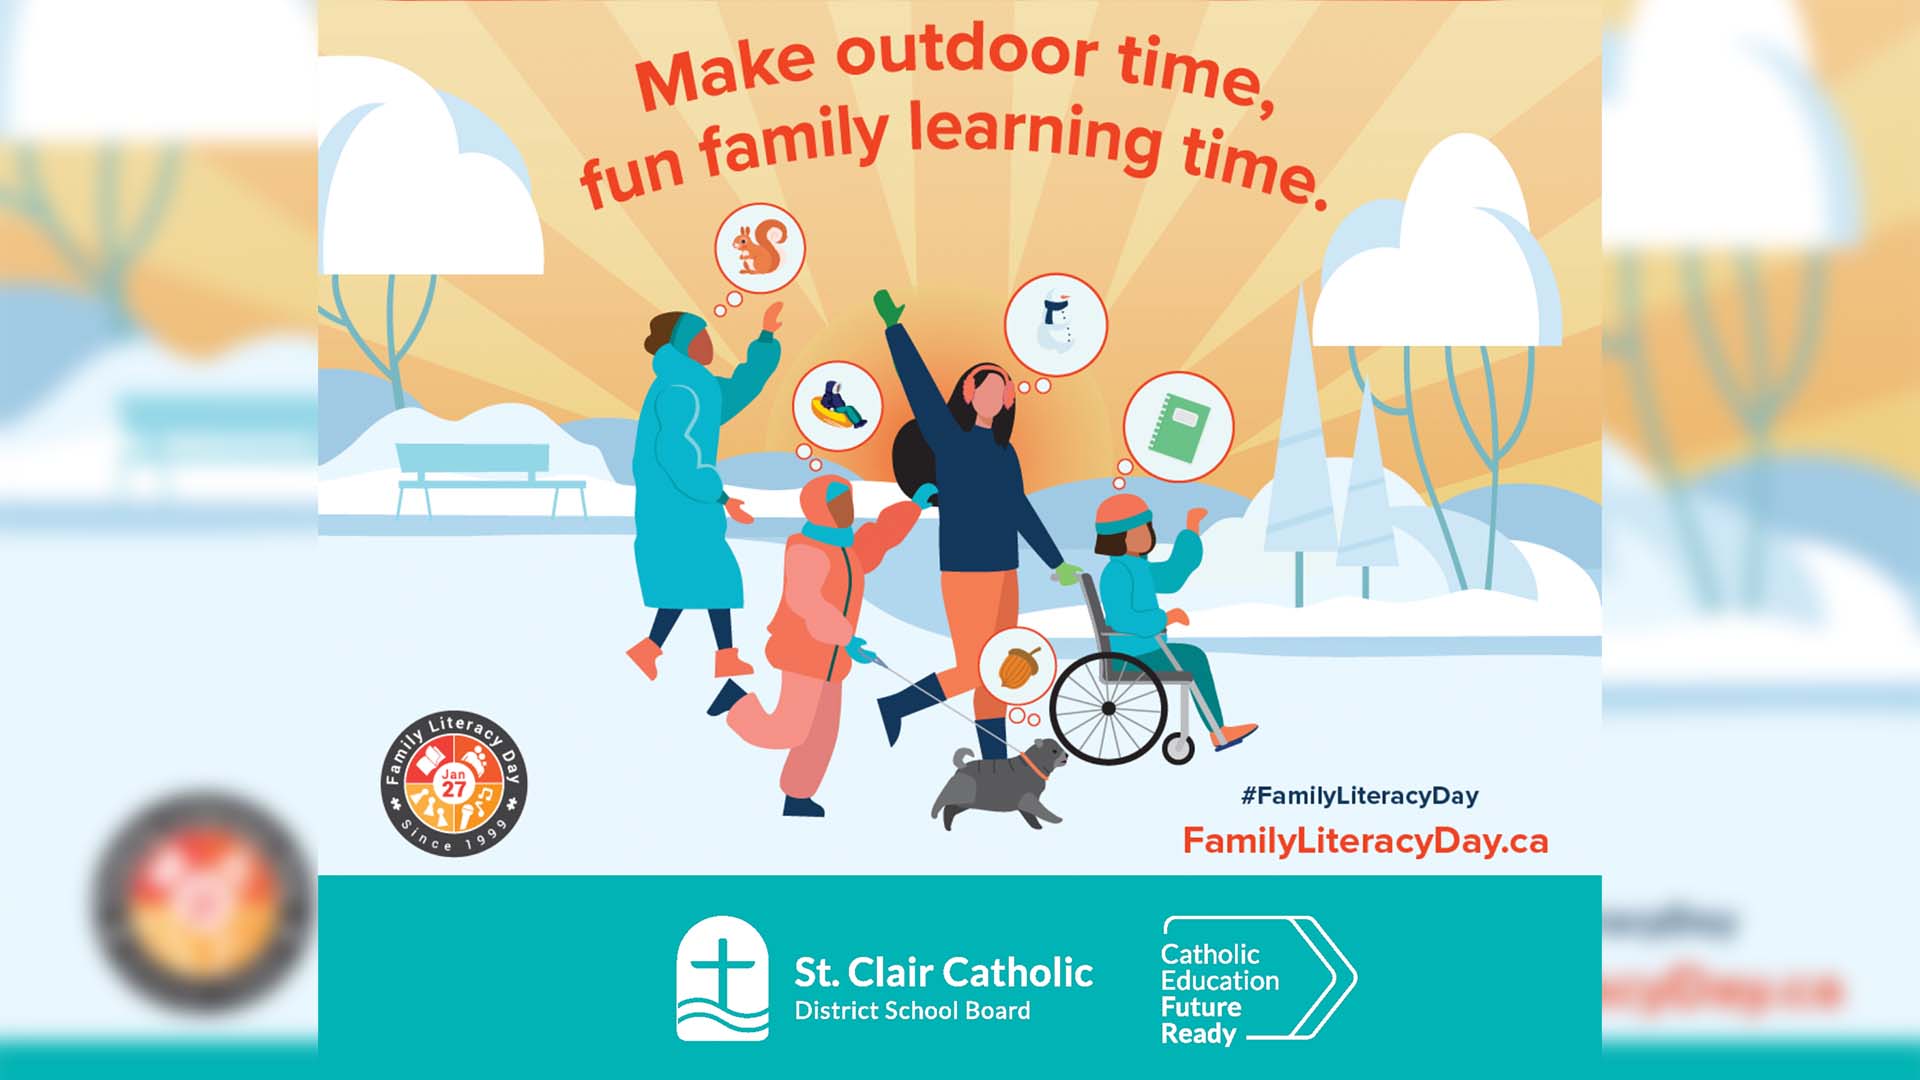 Make outdoor time, fun family learning time.